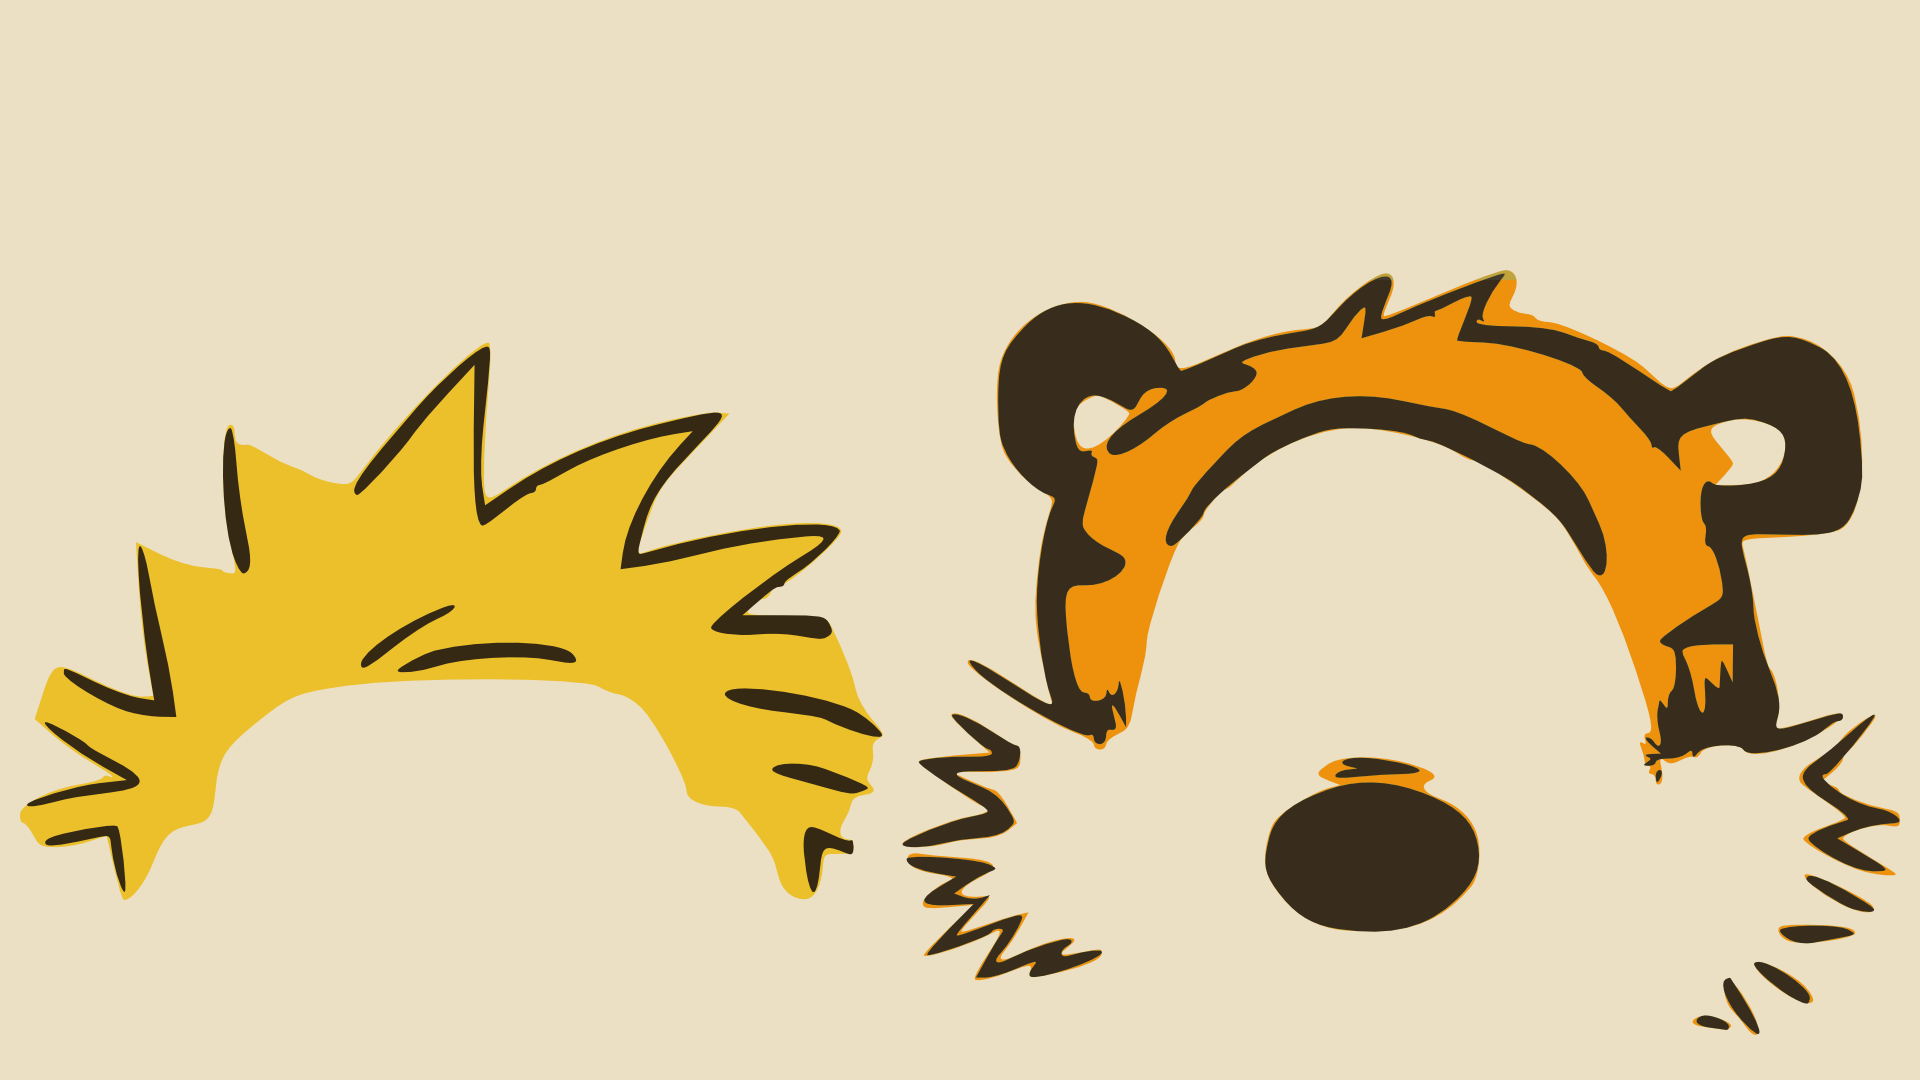 Minimal Calvin and Hobbes 1920x1080 wallpapers